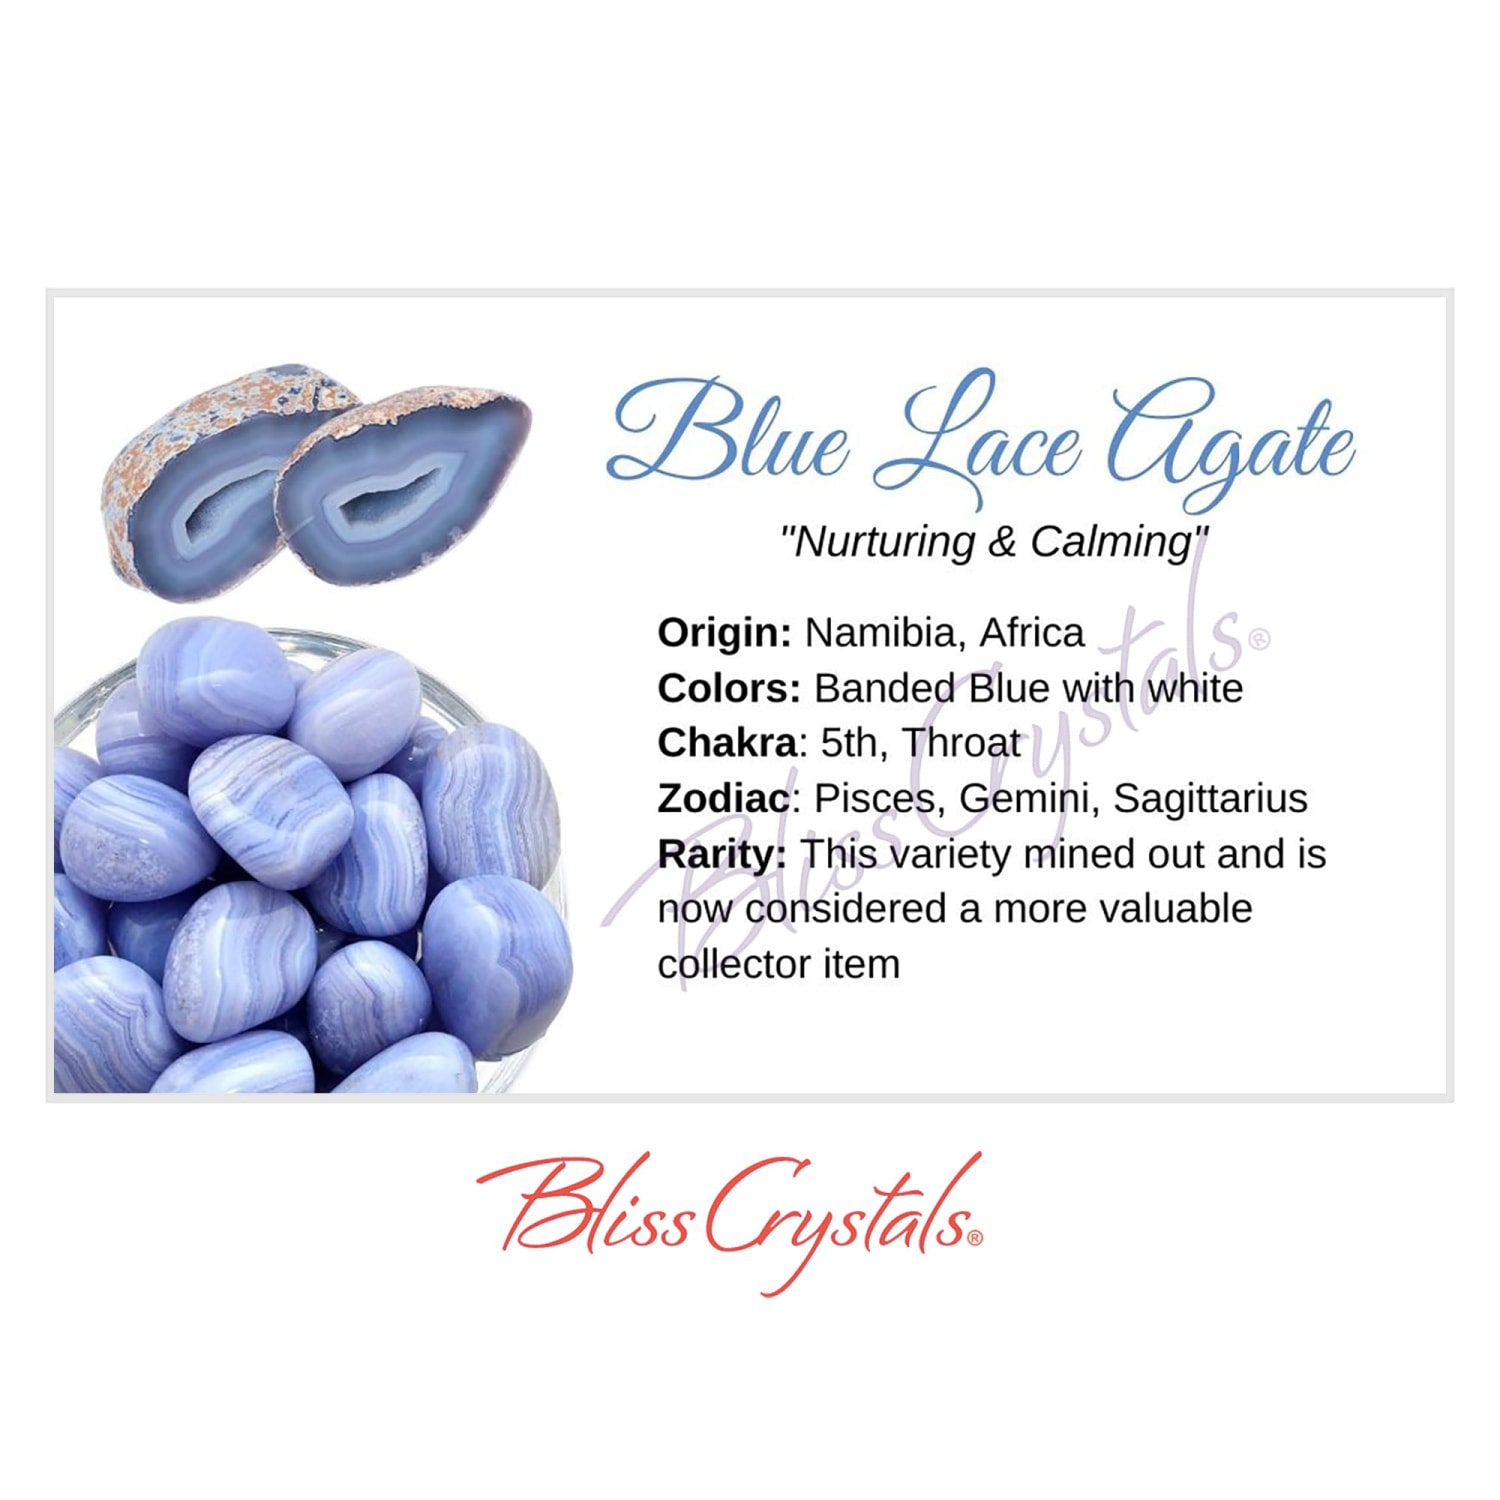 https://cdn.shopify.com/s/files/1/1869/1587/products/blue-lace-agate-crystal-information-card-double-sided-hc16-934.jpg?v=1666170462